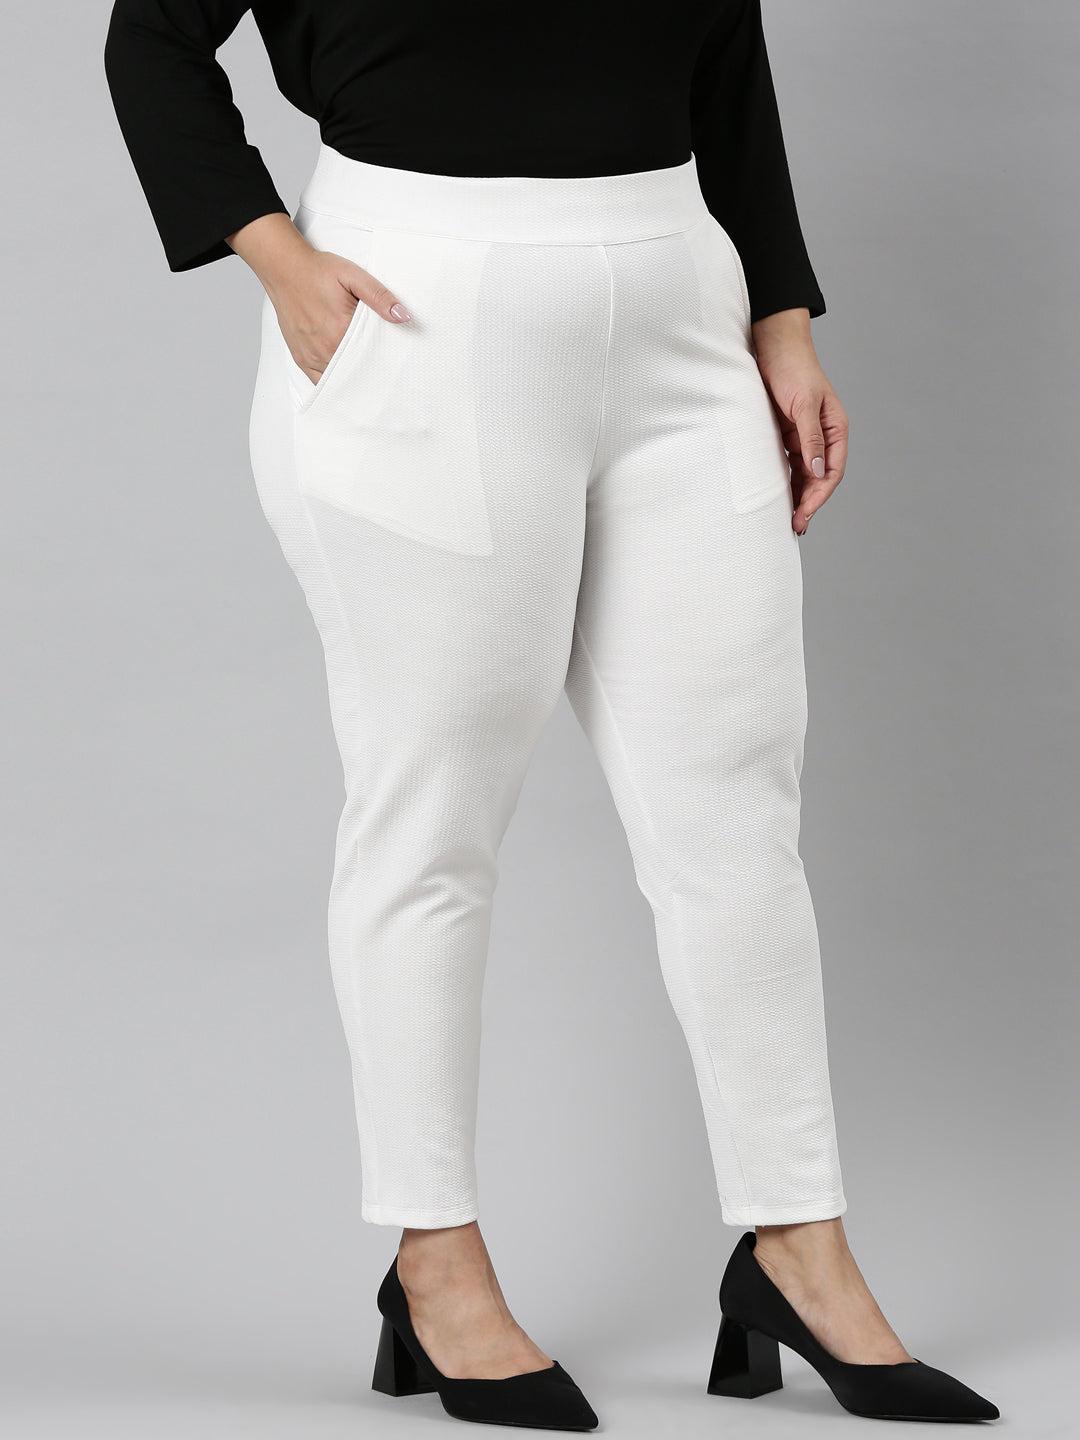 WHITE EMBOSSED STRETCH PANTS